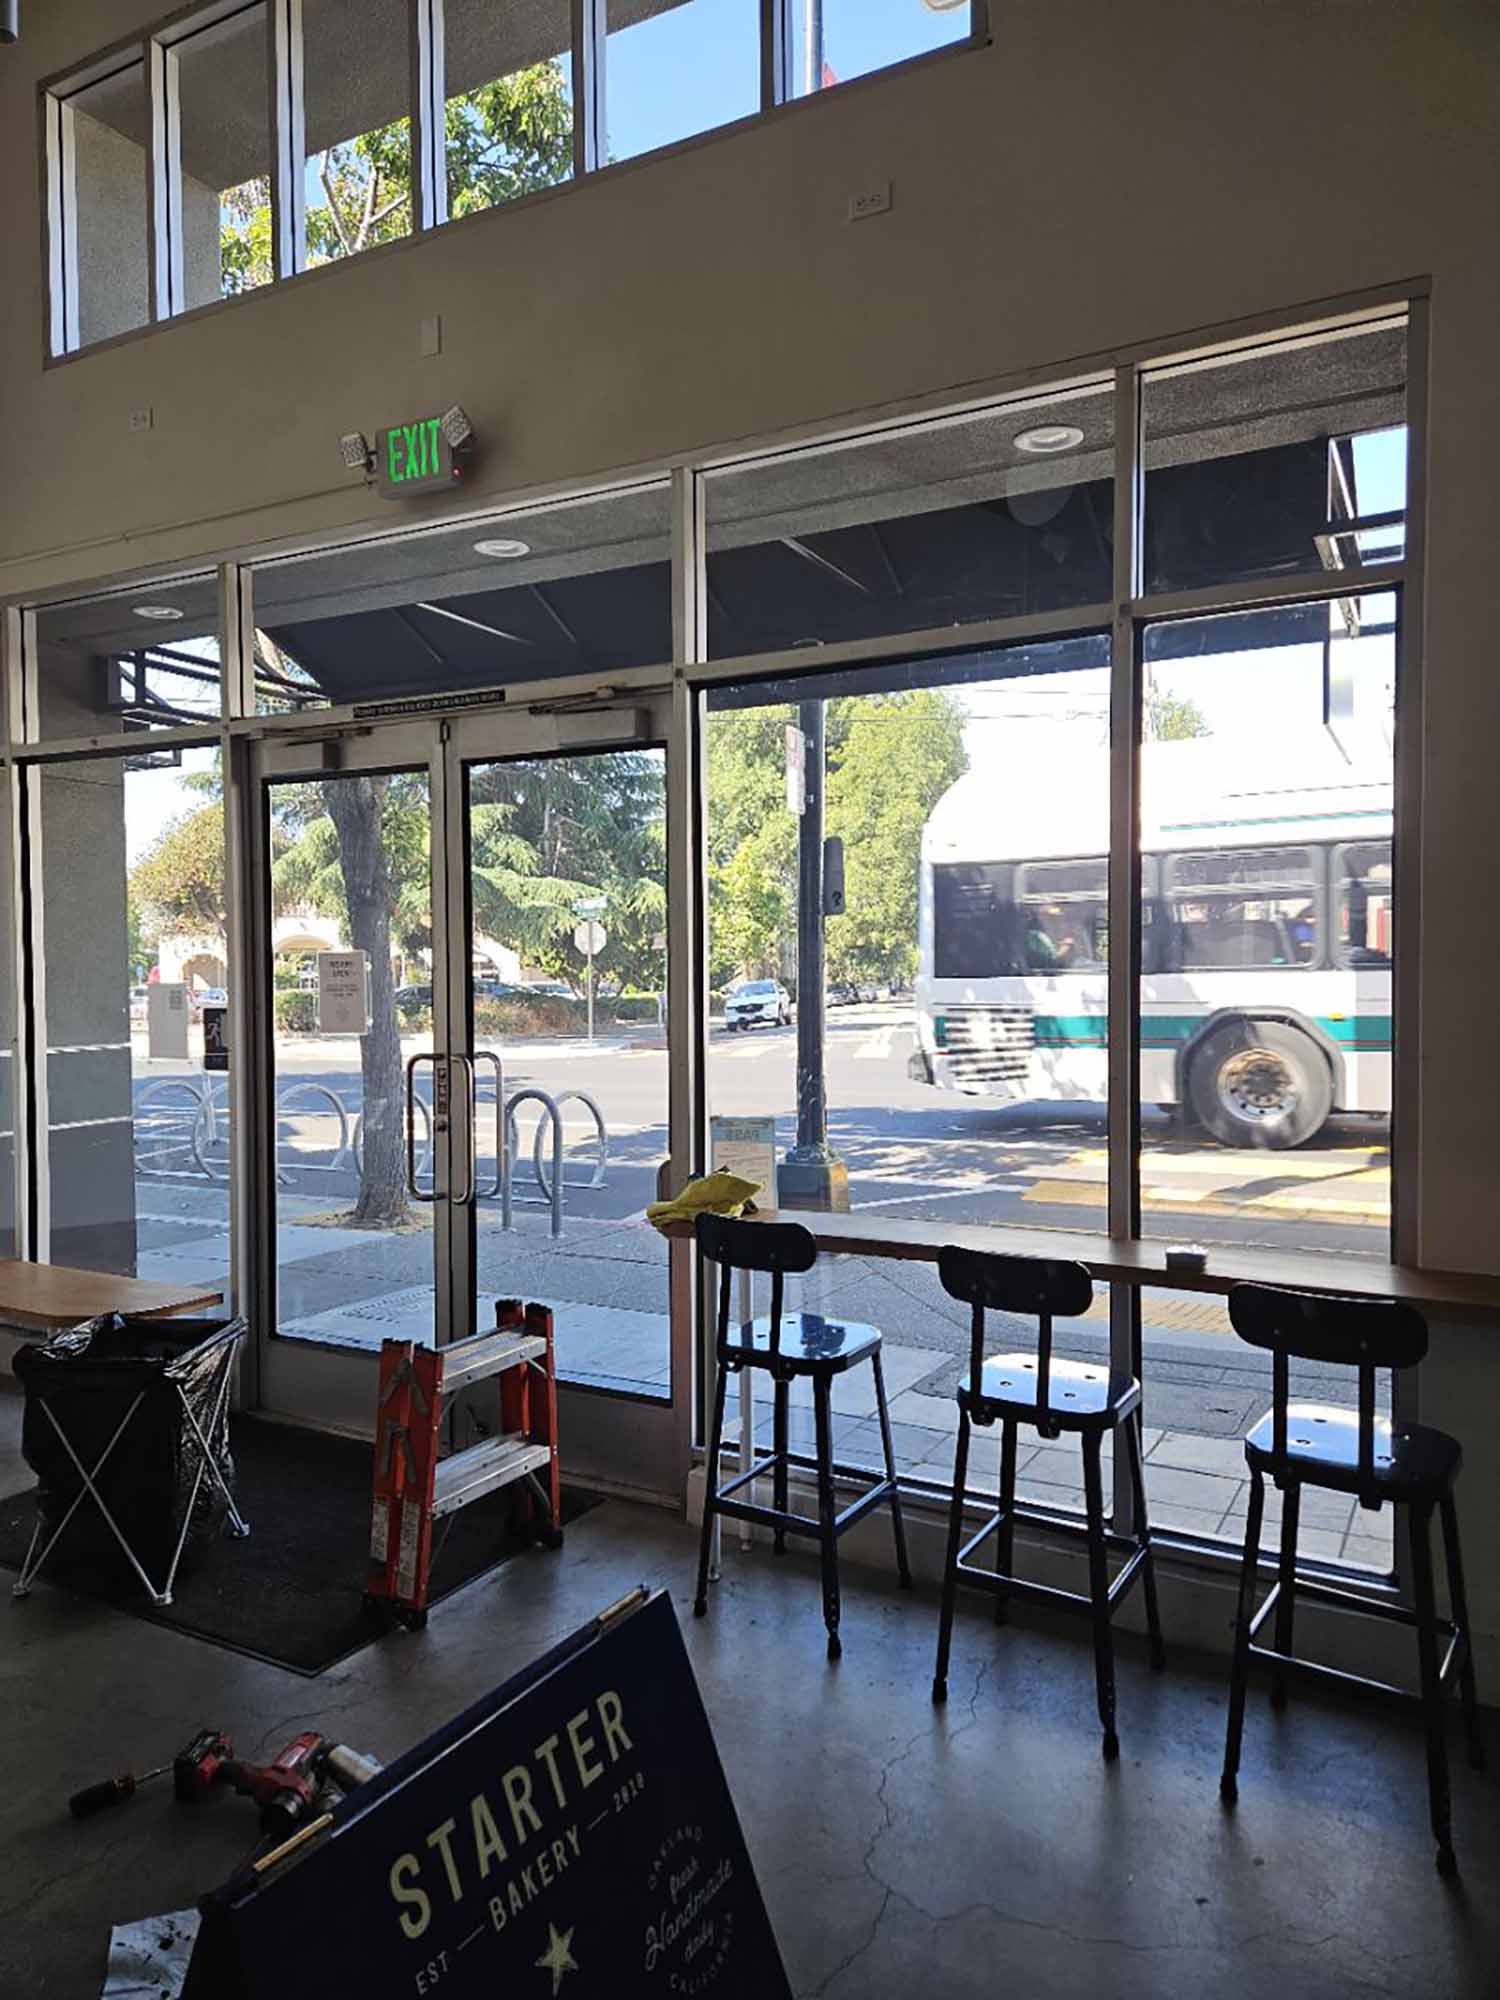 3M Safety Window Film for an Oakland, CA Bakery. Get a free estimate in the entire San Francisco Bay Area from ClimatePro.